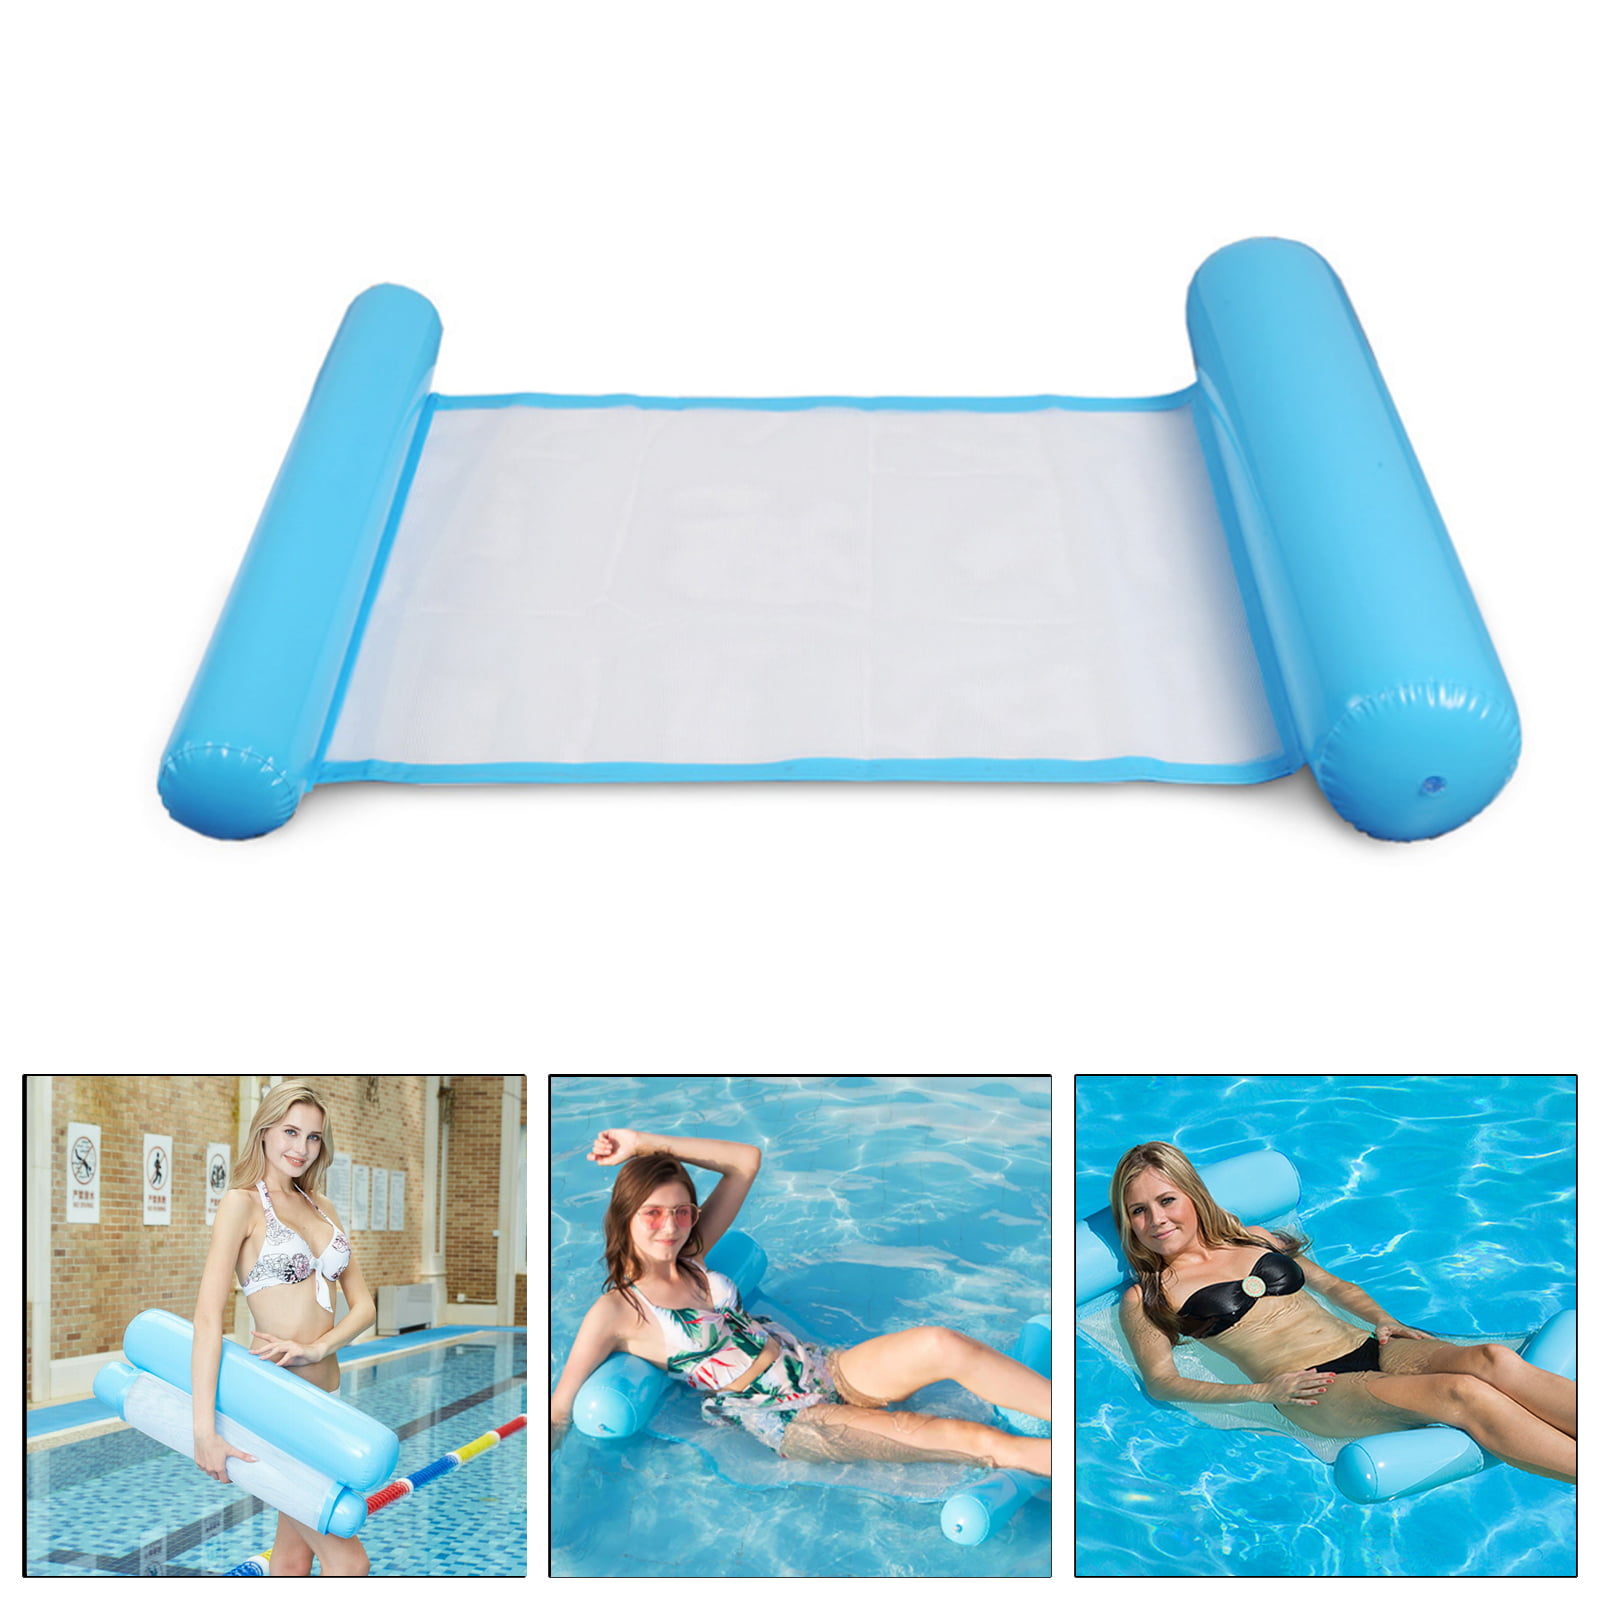 Swimming Pool Toy Hammock Lounge Inflatable Water Floating Bed Mat Chair Toy 